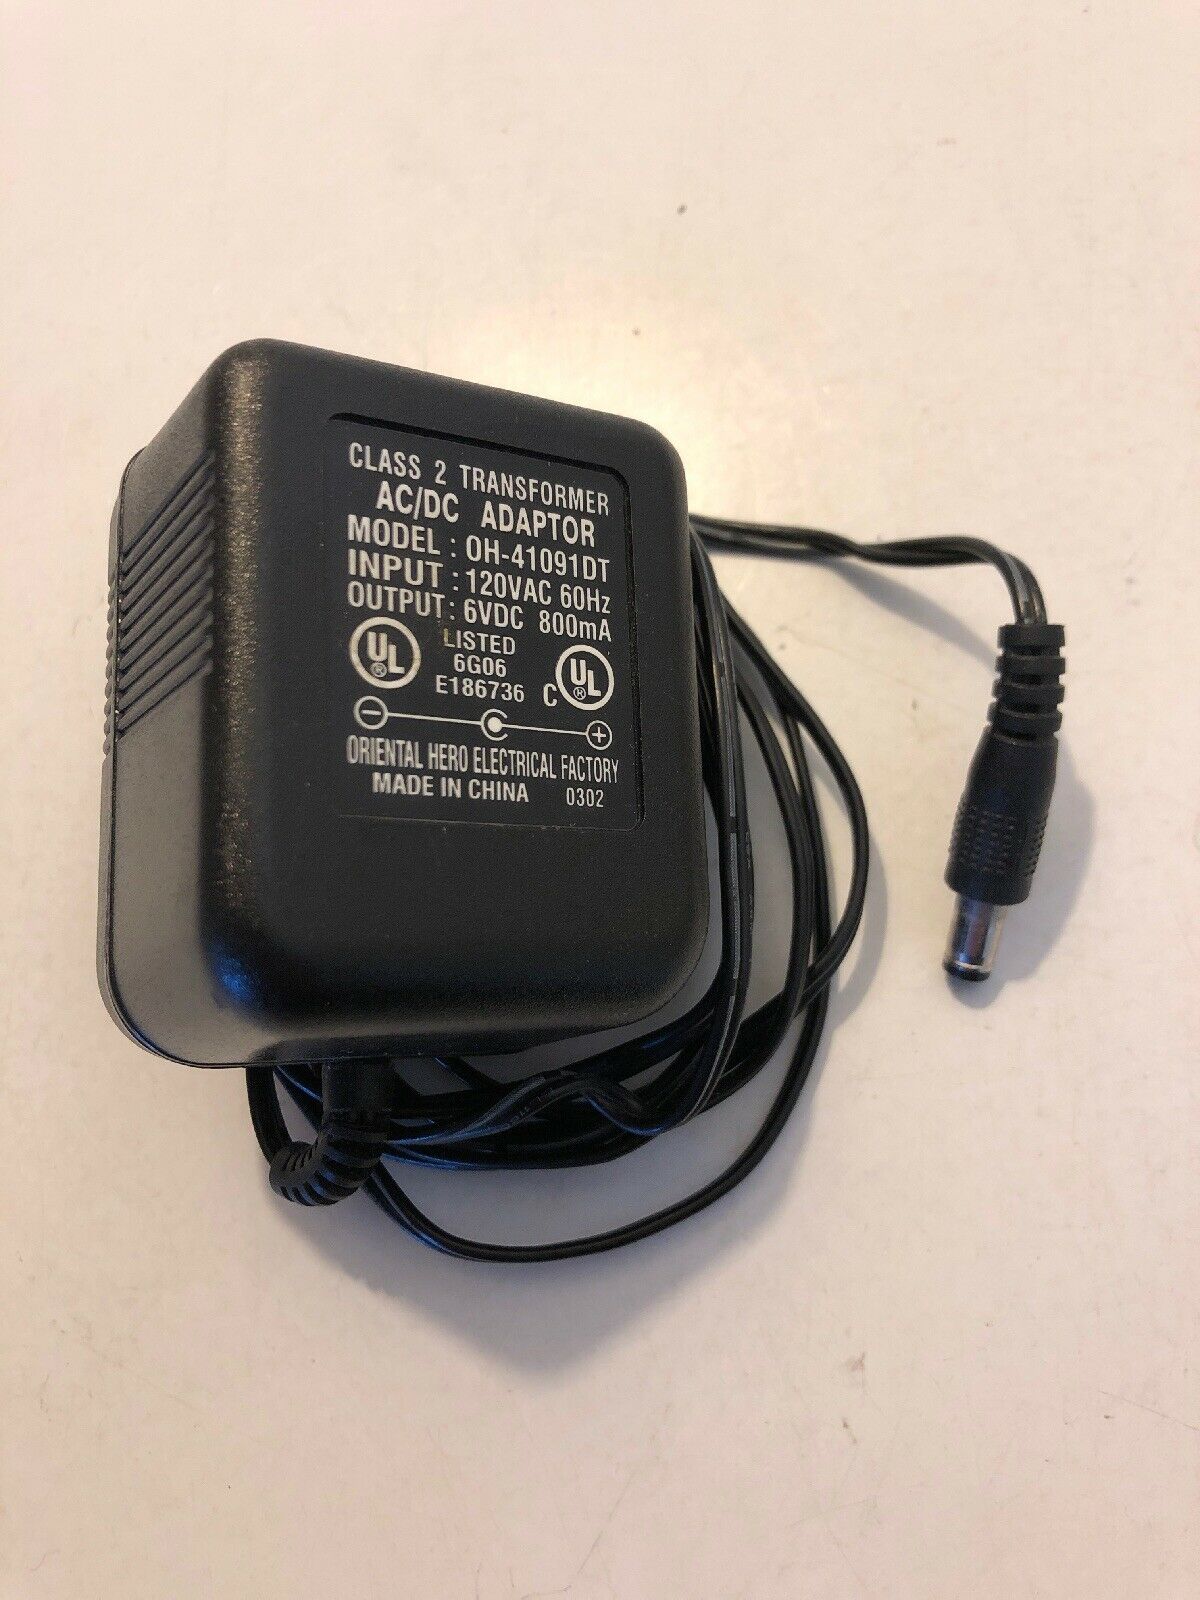 *Brand NEW*OH-41091DT Class 2 Transformer 6V 800mA Ac Adapter